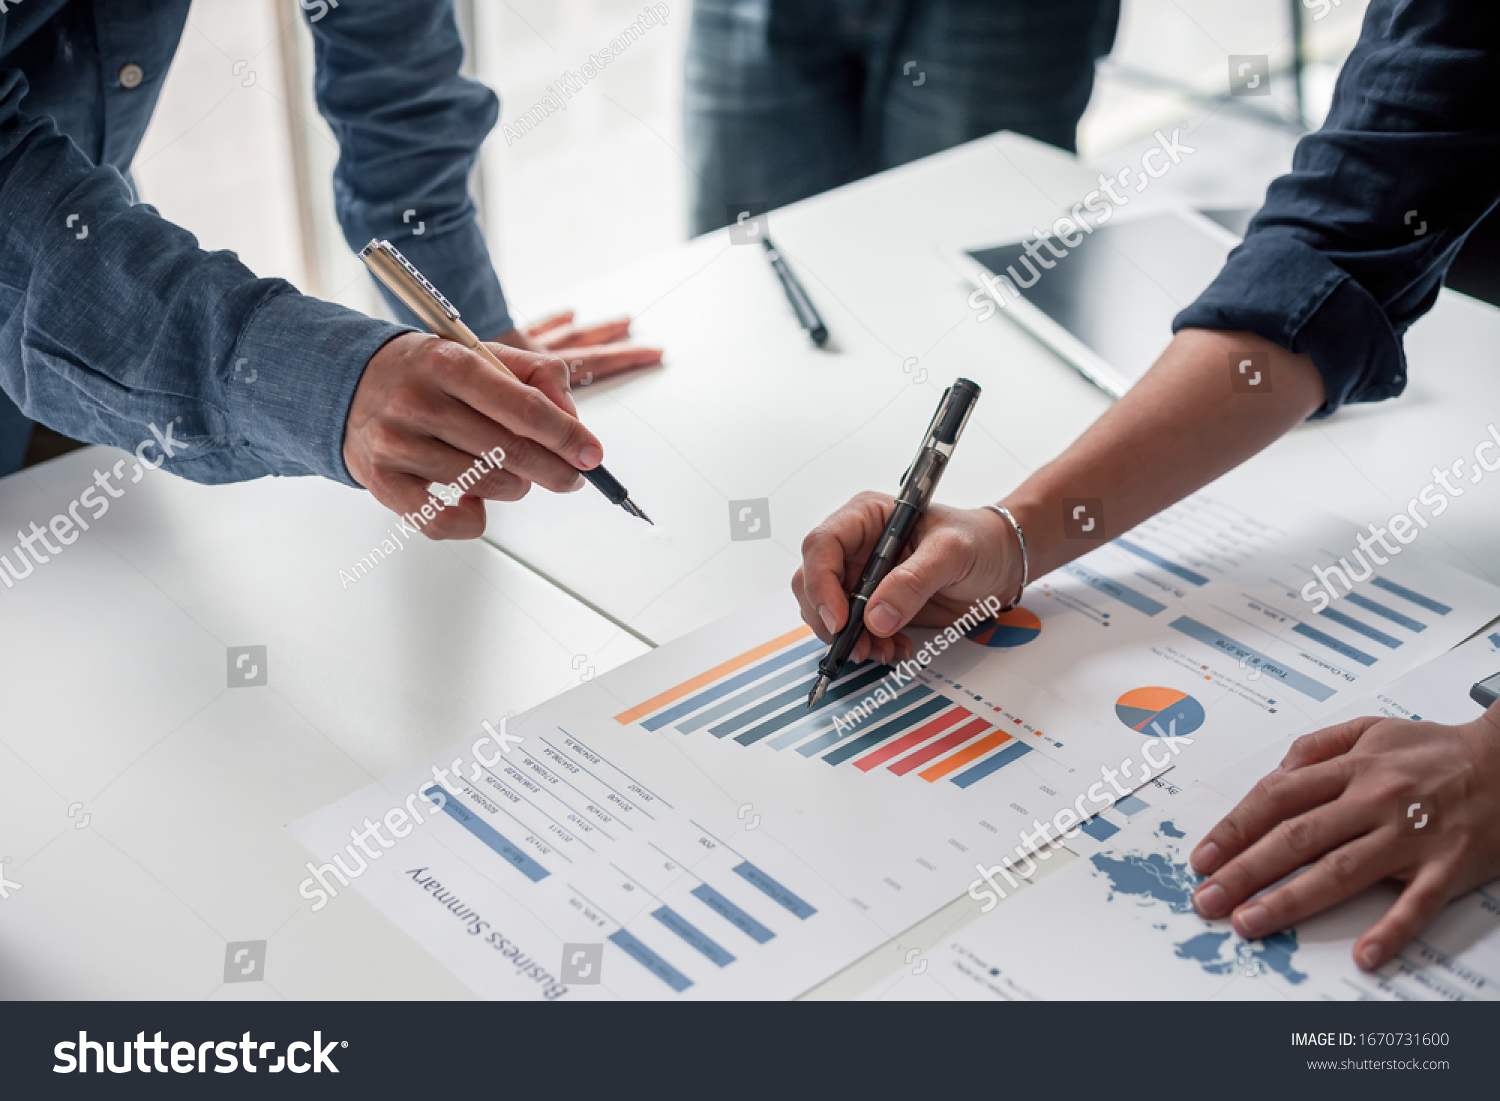 Group of business people meeting together Pointing to the graph assess business profits. #1670731600